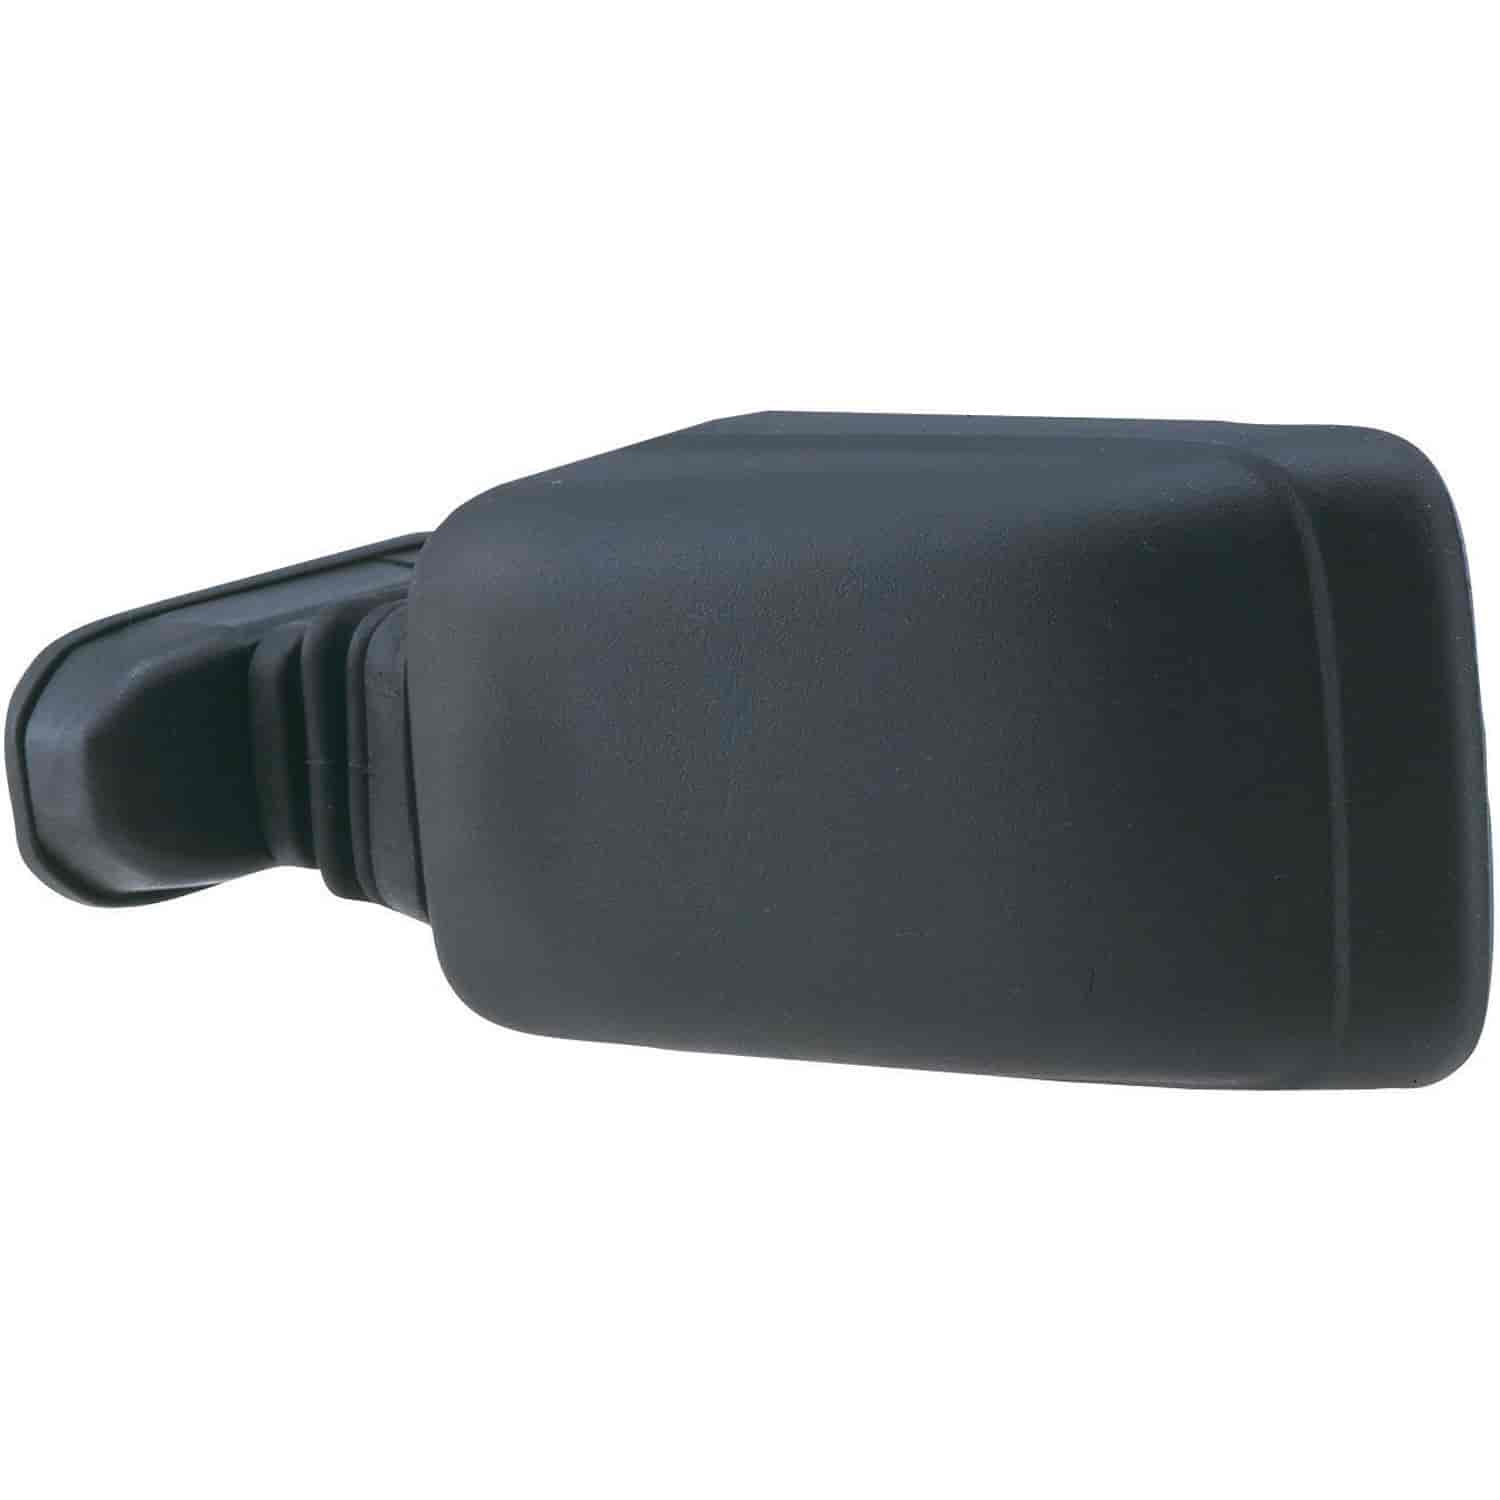 Universal Car Mirror Euro Style 6 x 3 1/2 universal fit black finish fits driver or passenger side easy install.